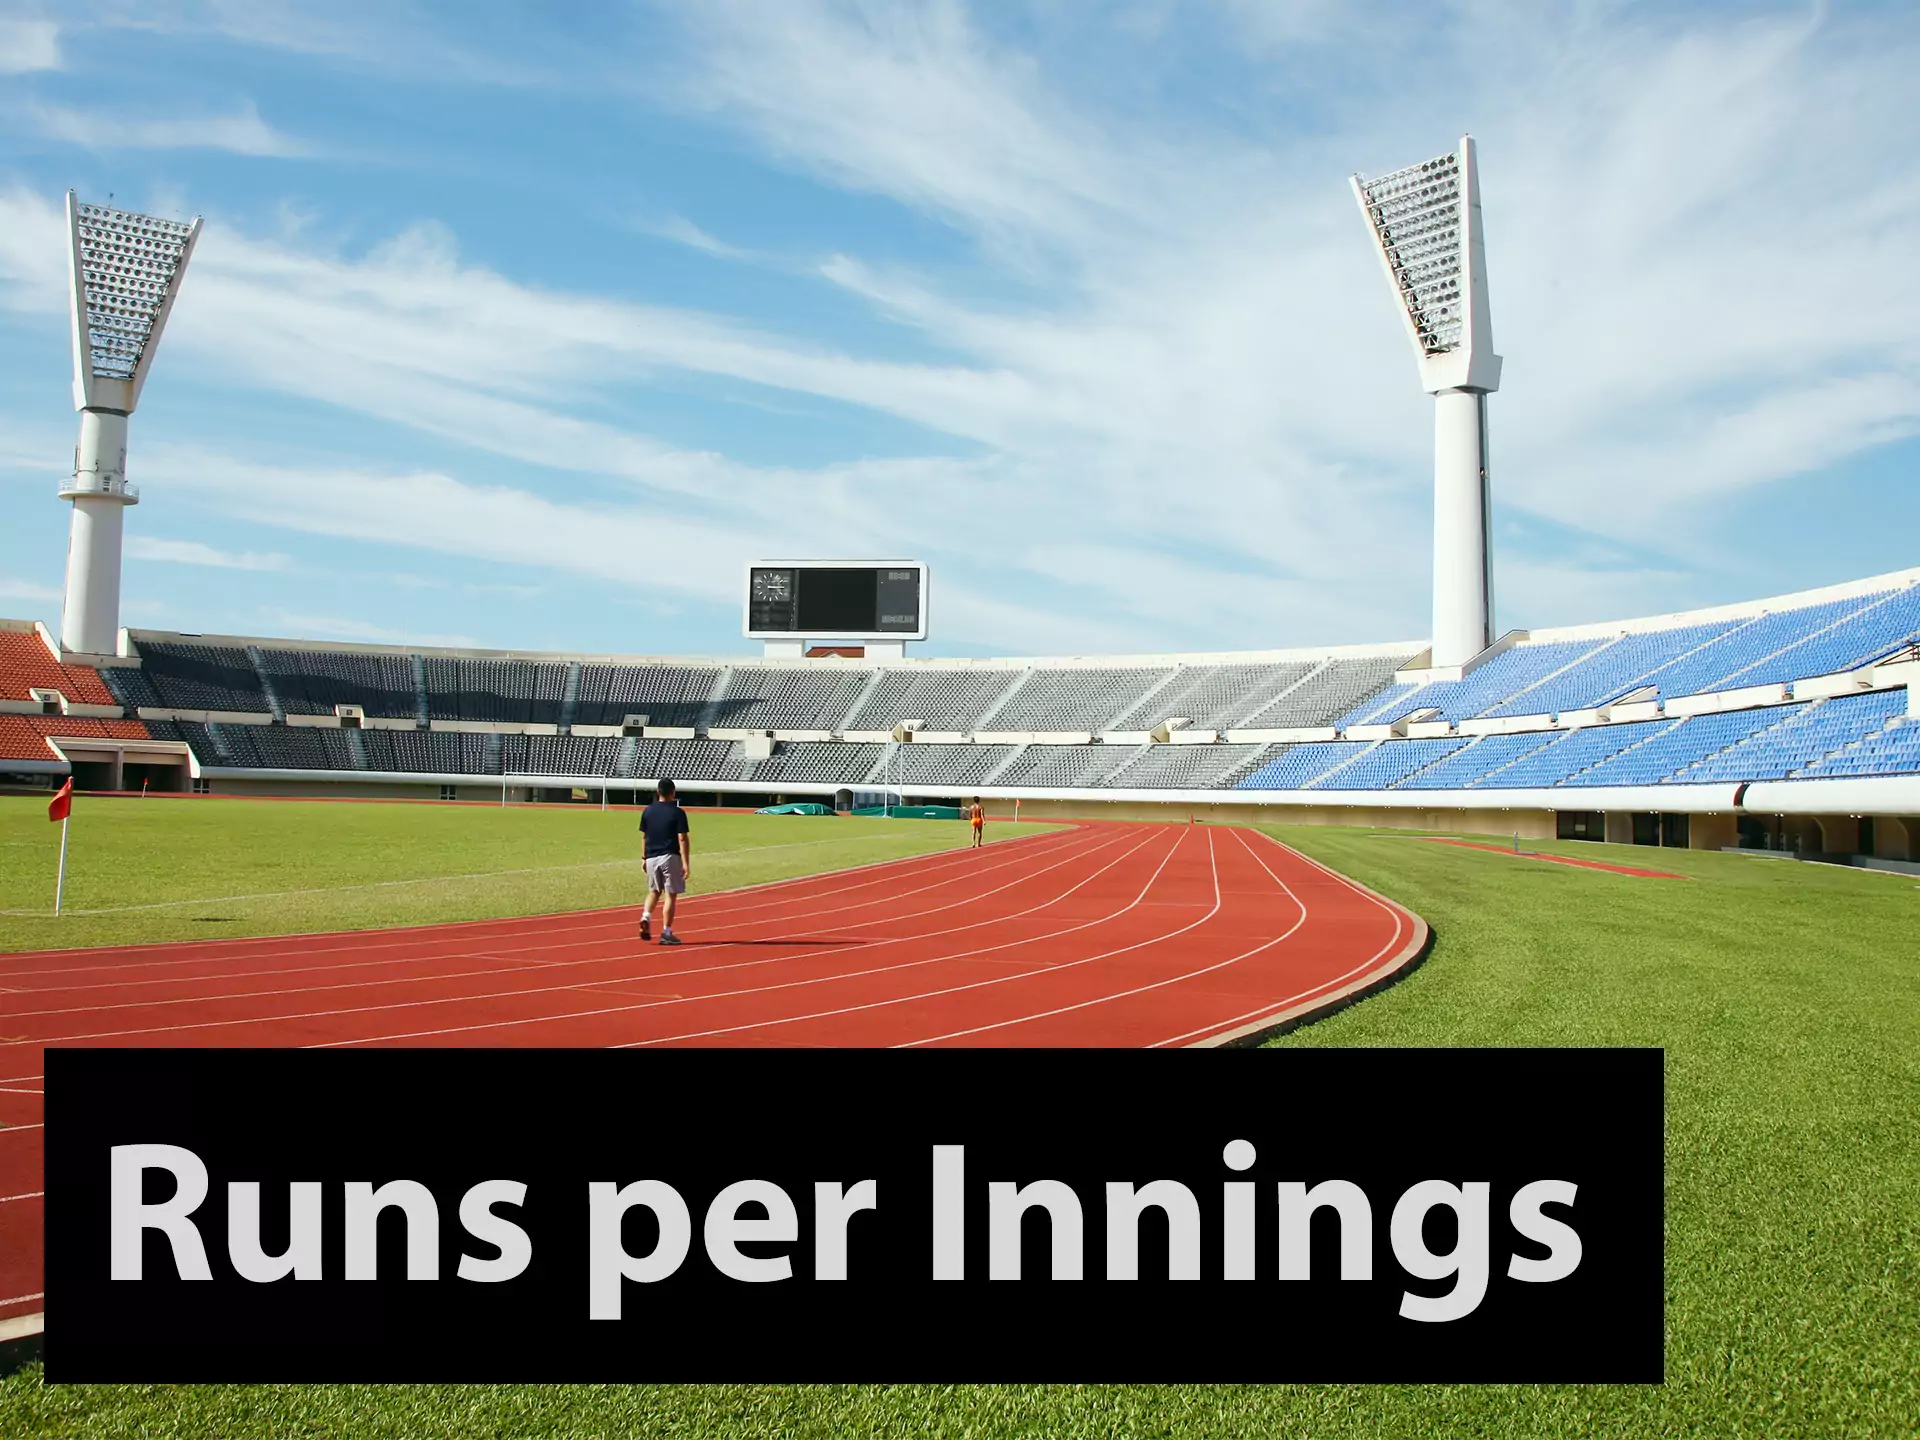 You can choose to bet on runs per innings at Betway.